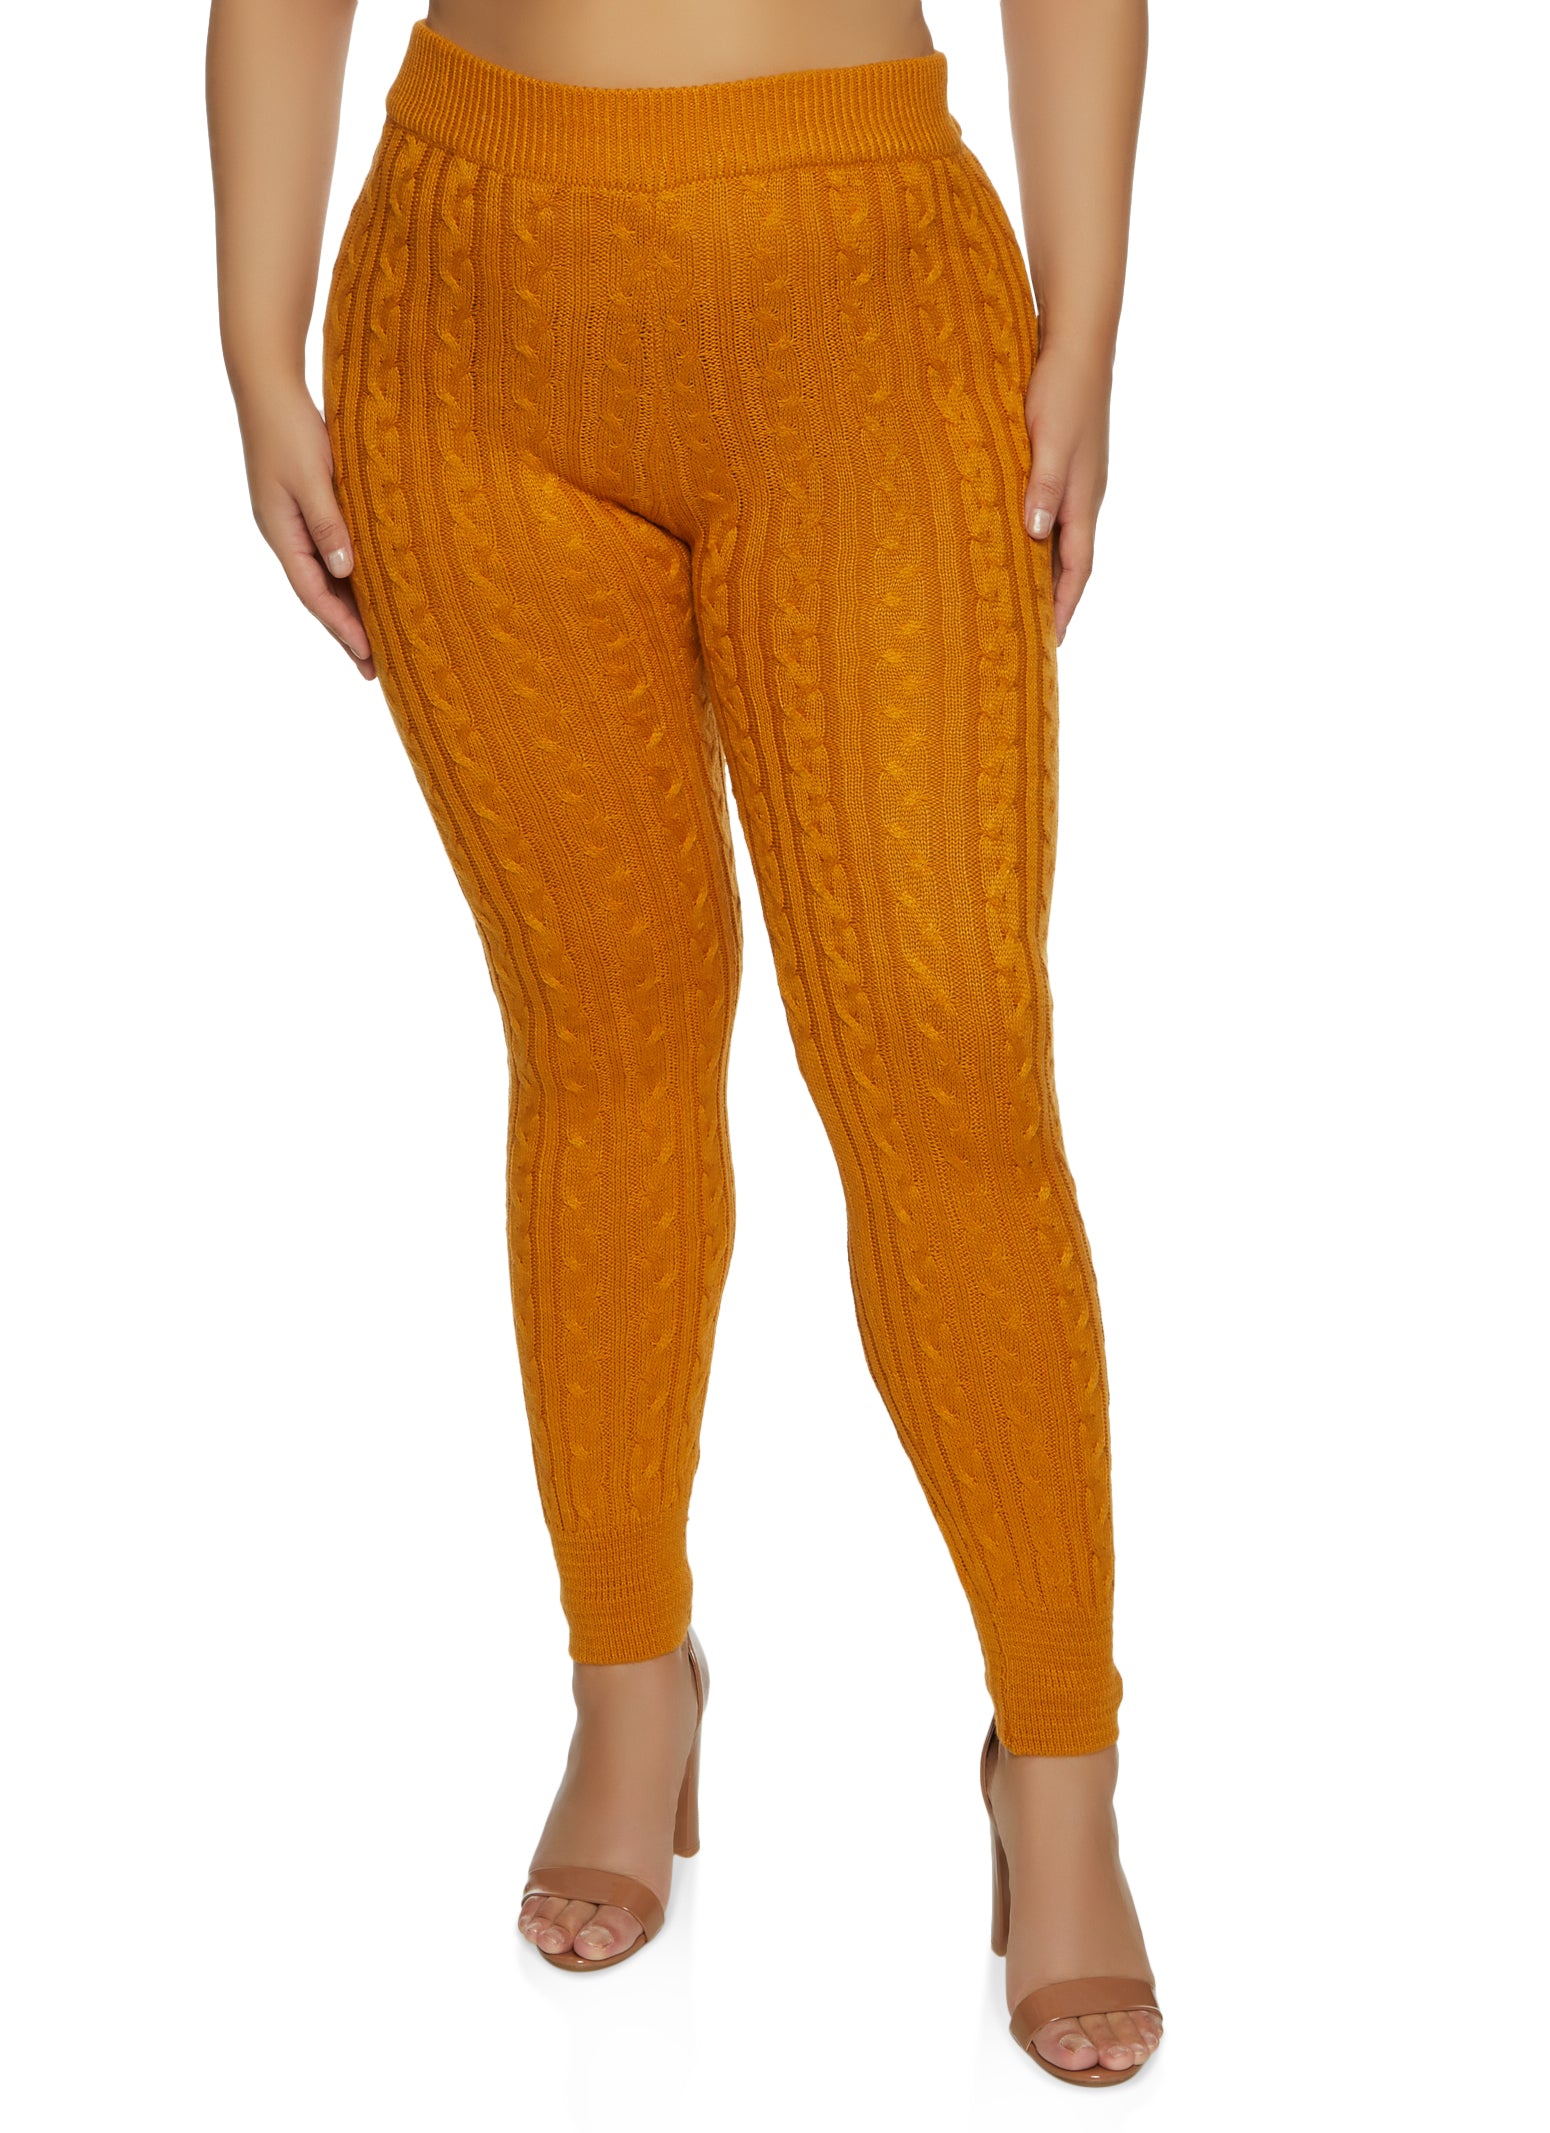 Plus Size Cable Knit High Waist Leggings - Mustard